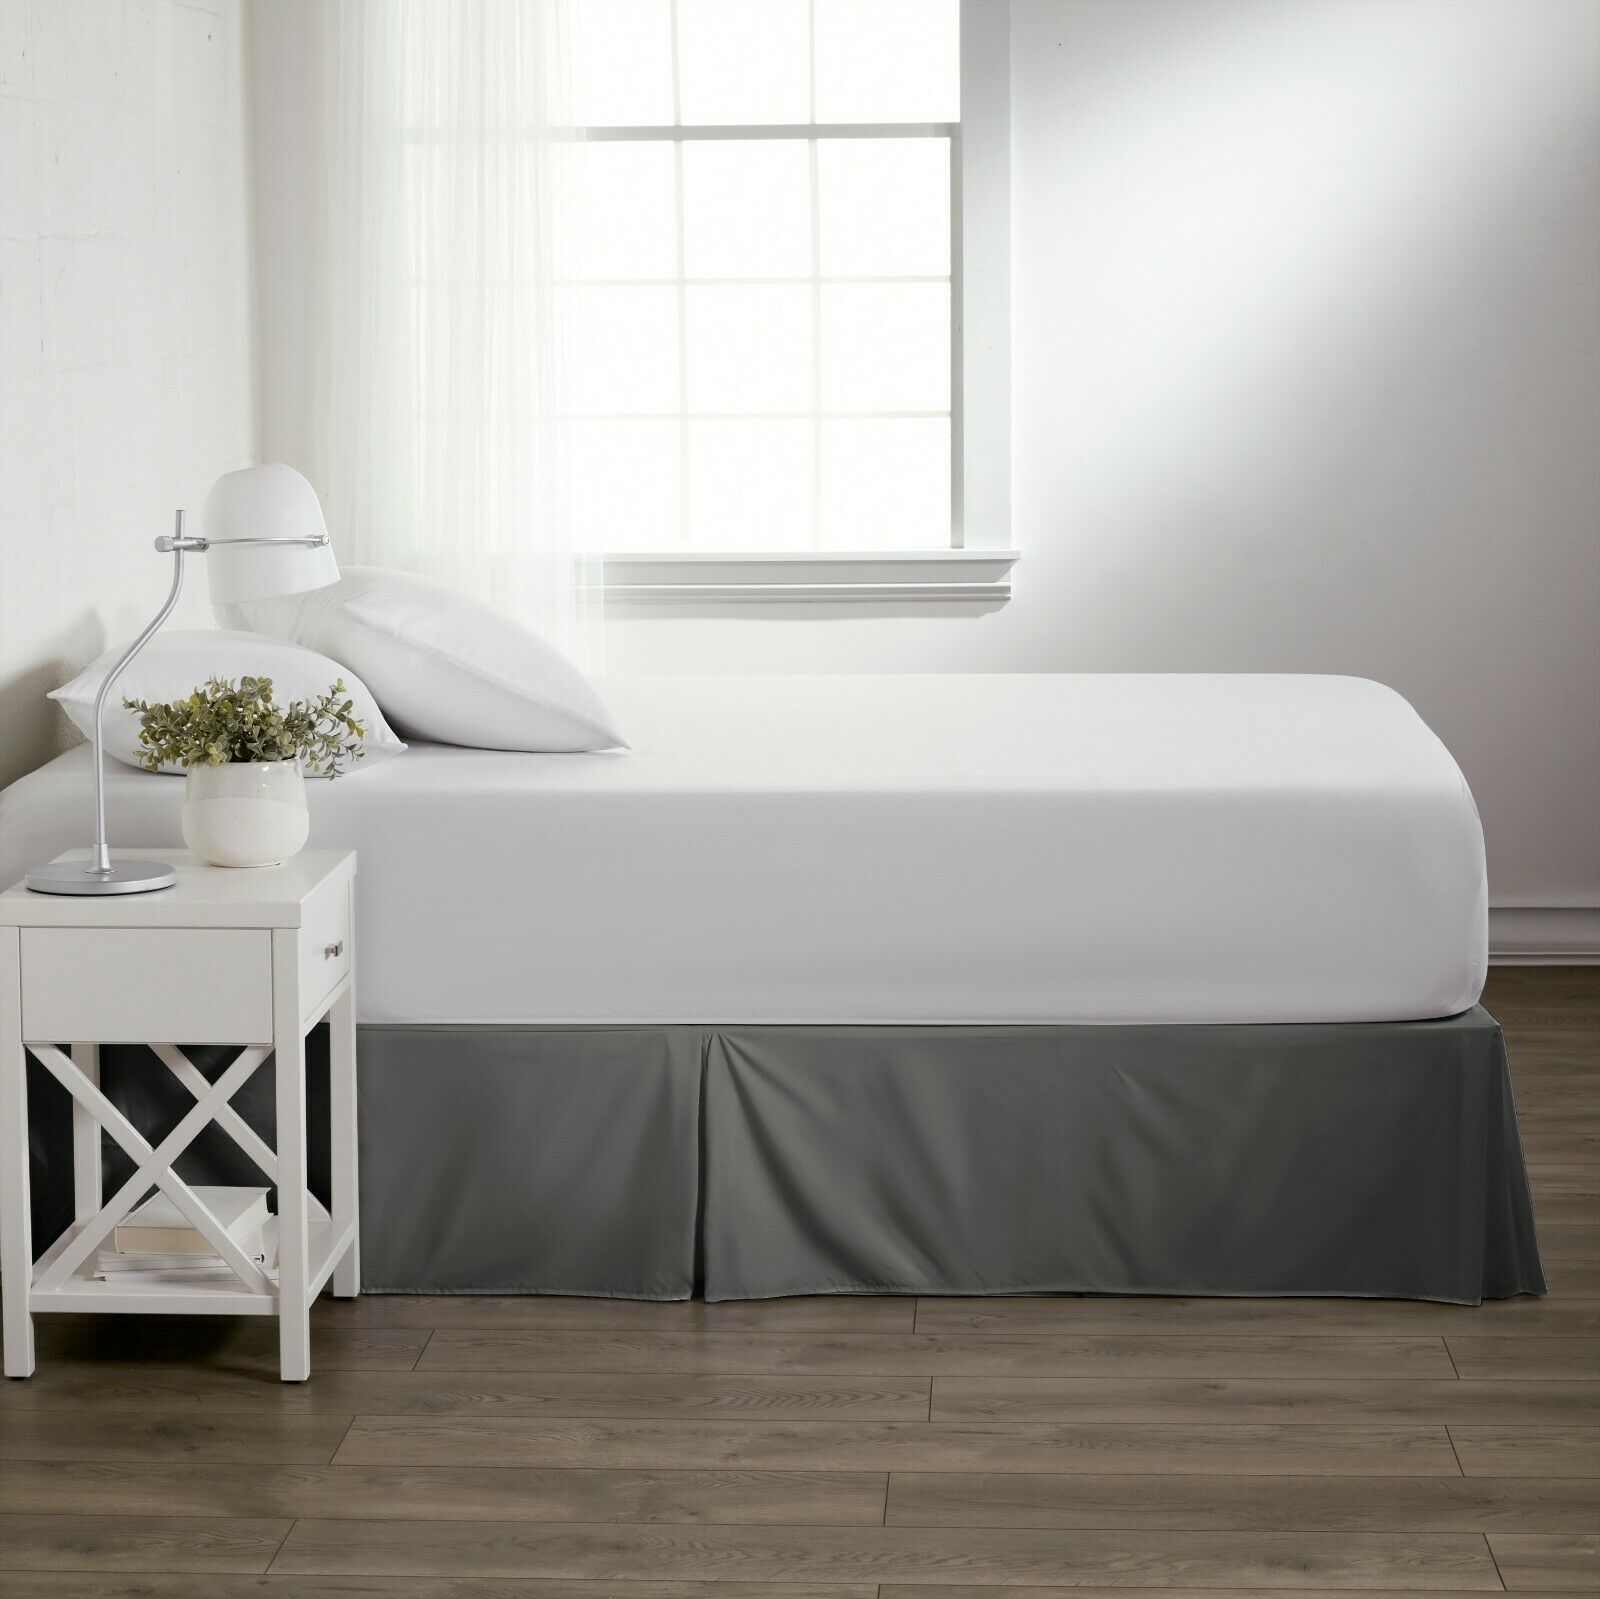 Premium Luxury Hotel Quality - Bed Skirt - The Home Collection